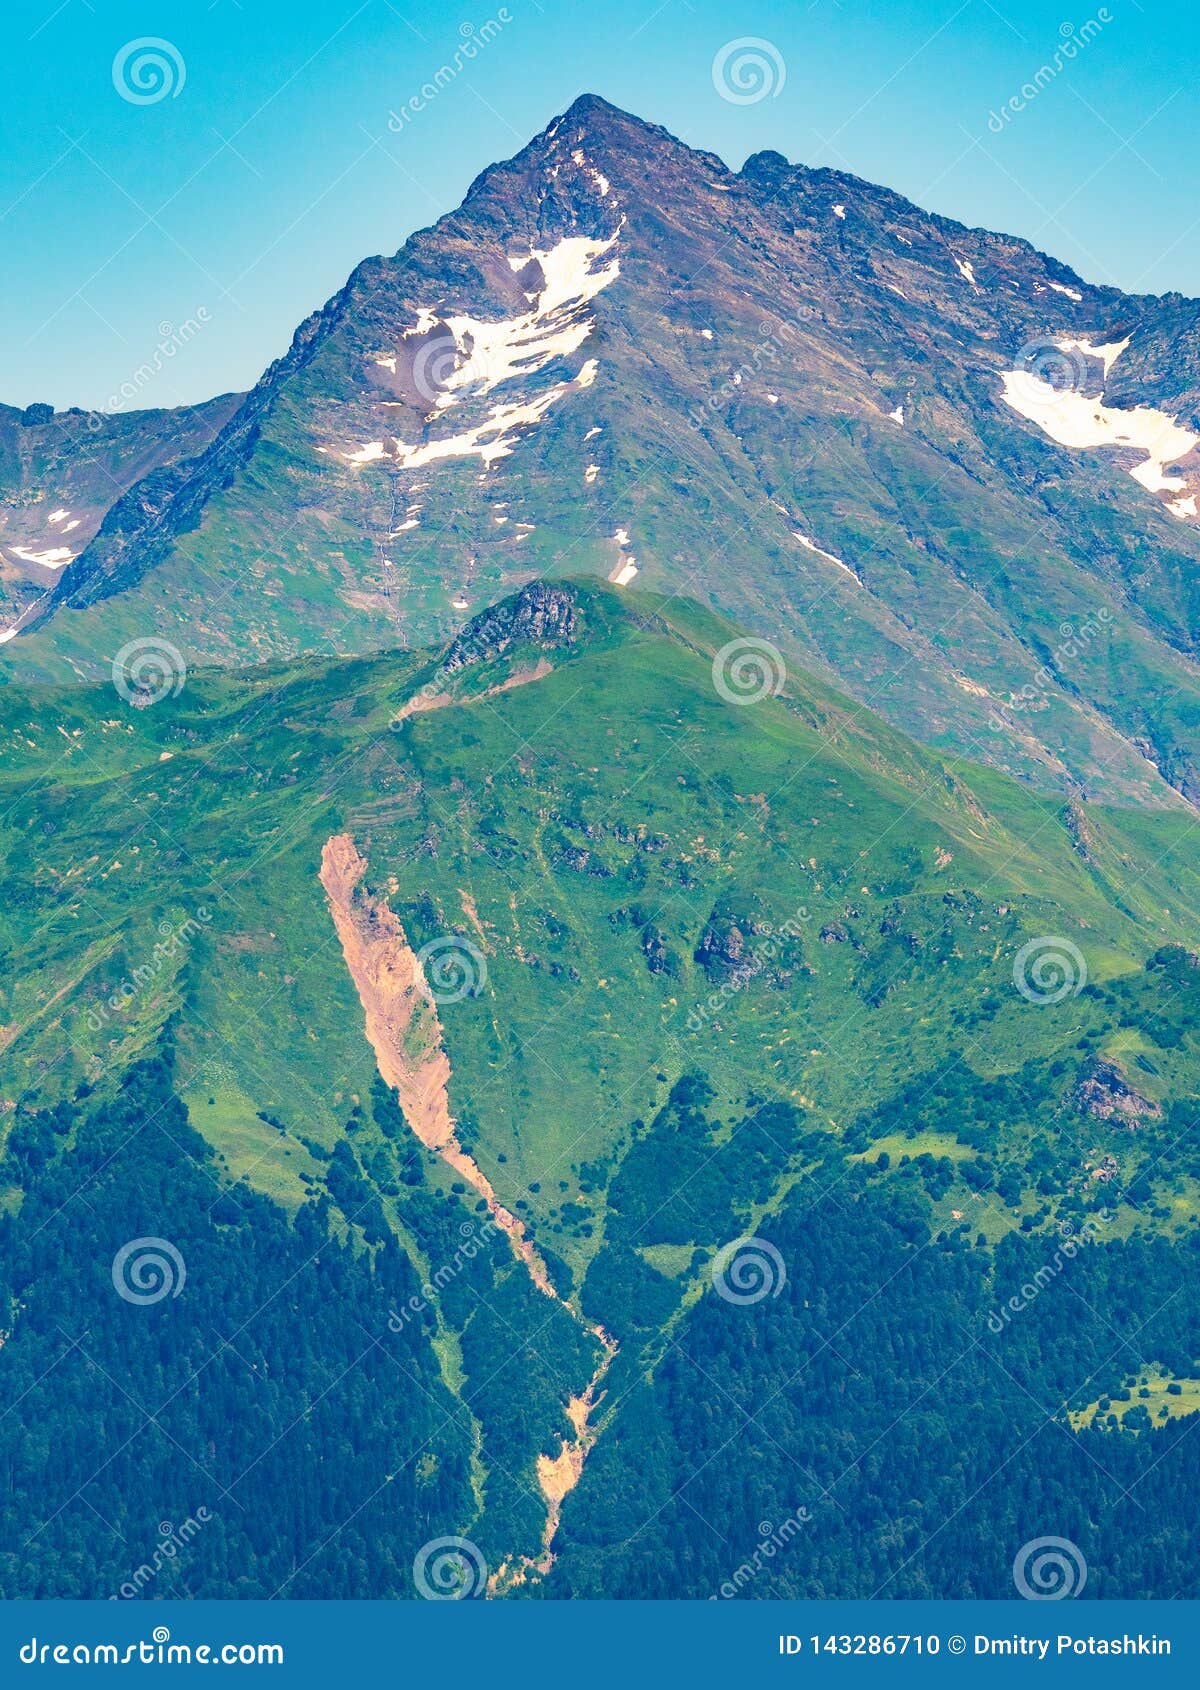 Top view of the mountain range and peaks covered with snow. Mountain peak in the summer